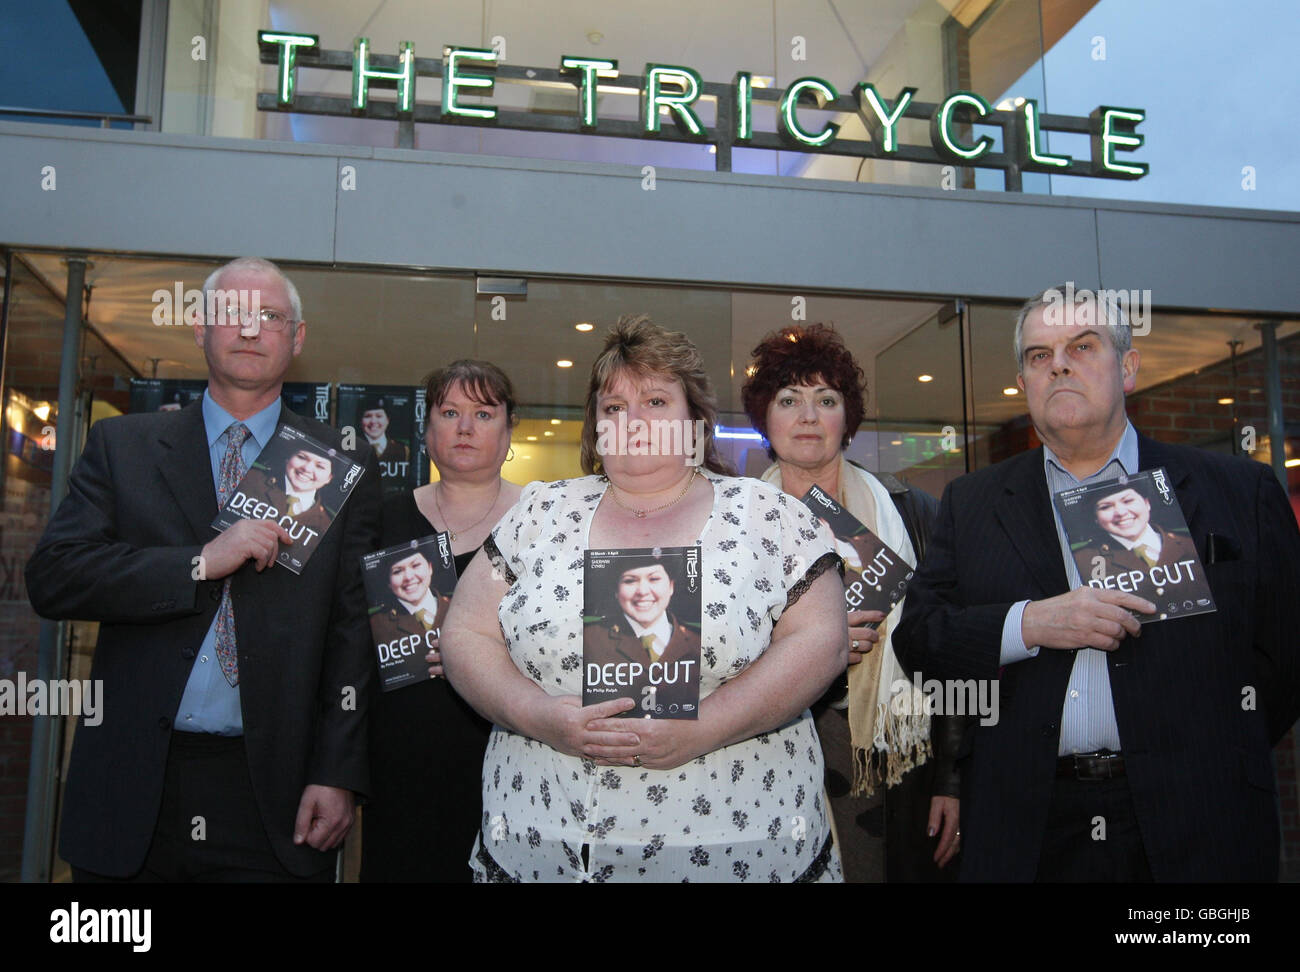 Families of soldiers who died while serving in the British Army at Deepcut Army Barracks, (left to right) Geoff and Diane Gray, parents of Geoff Gray, Yvonne Collinson, mother of James Collinson, and Doreen and Desmond James, parents of Cheryl James, outside the Tricycle Theatre, Kilburn, London, which is to stage the play 'Deepcut' from 12th March 2009. Stock Photo